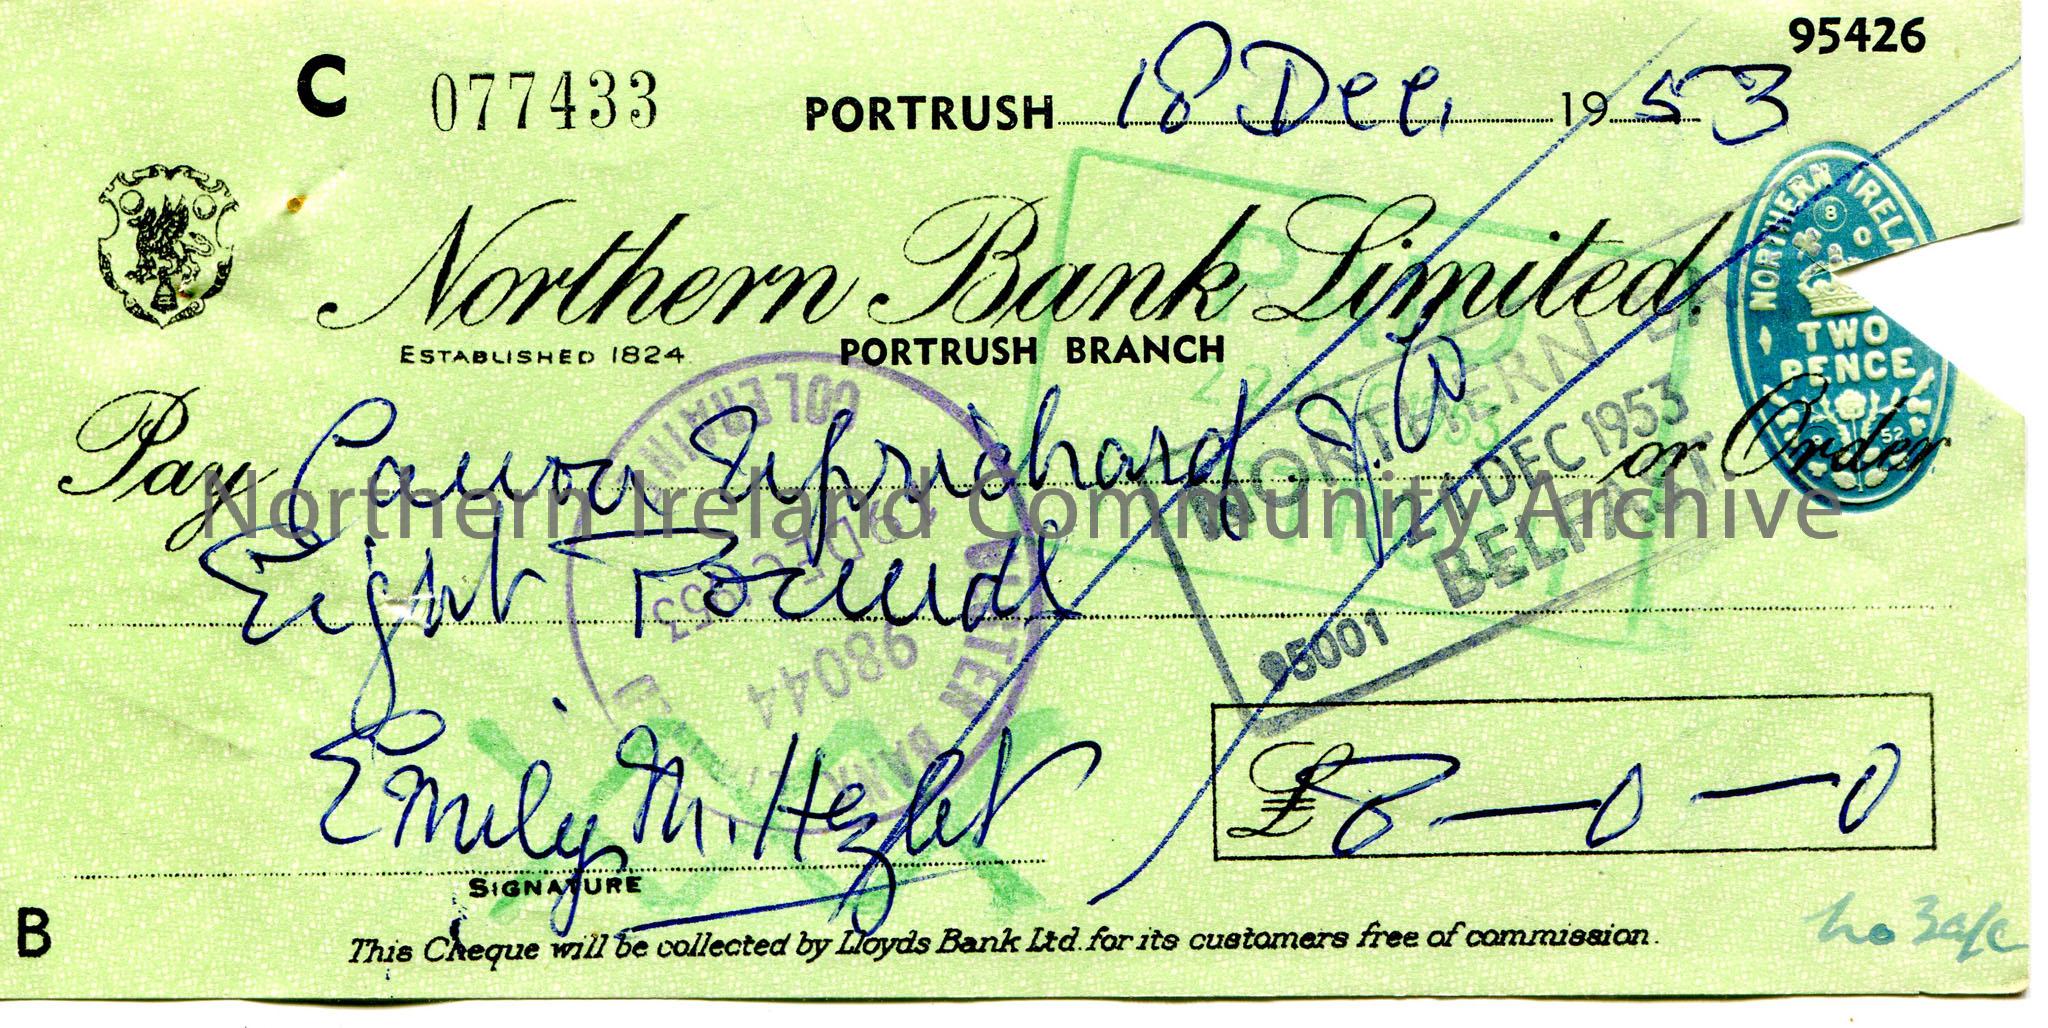 Northern Bank Limited, Portrush branch, cheque. Dated 18th December, 1953. Payable to Canon Uprichard from Emily M. Hezlet for £8.0.0. Three stam…